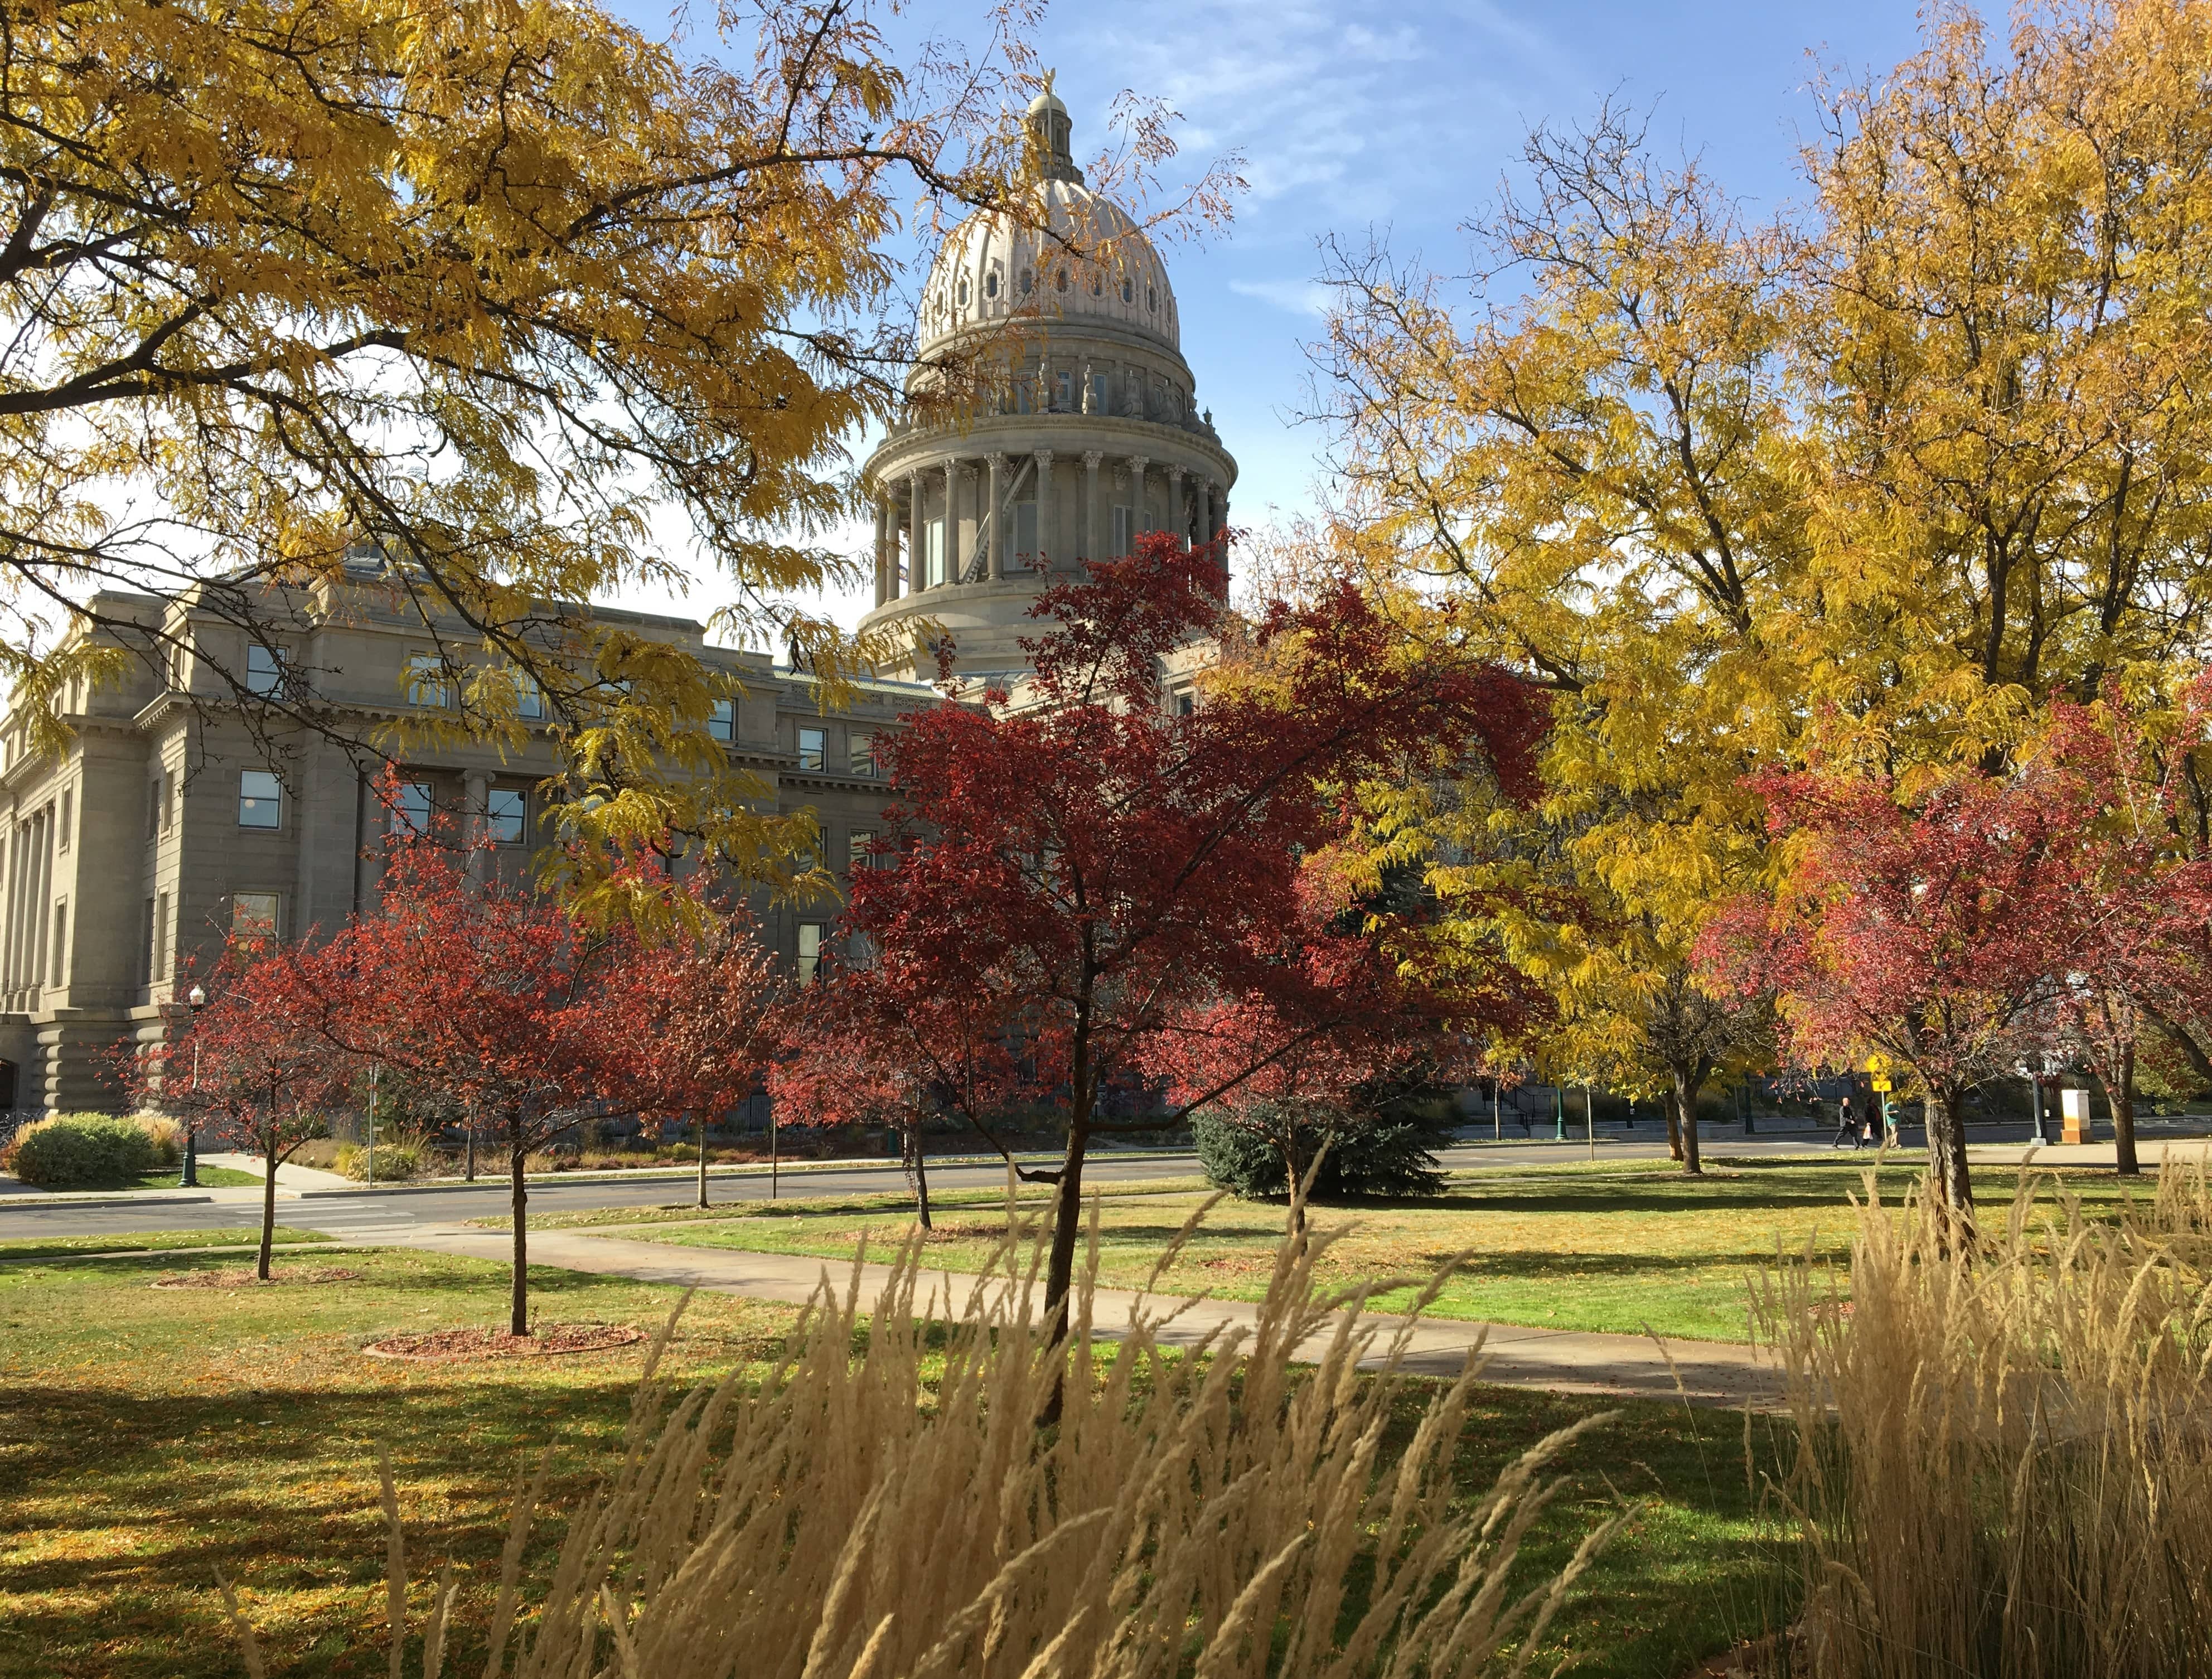 The Idaho Capitol from the back with autumn foliage.